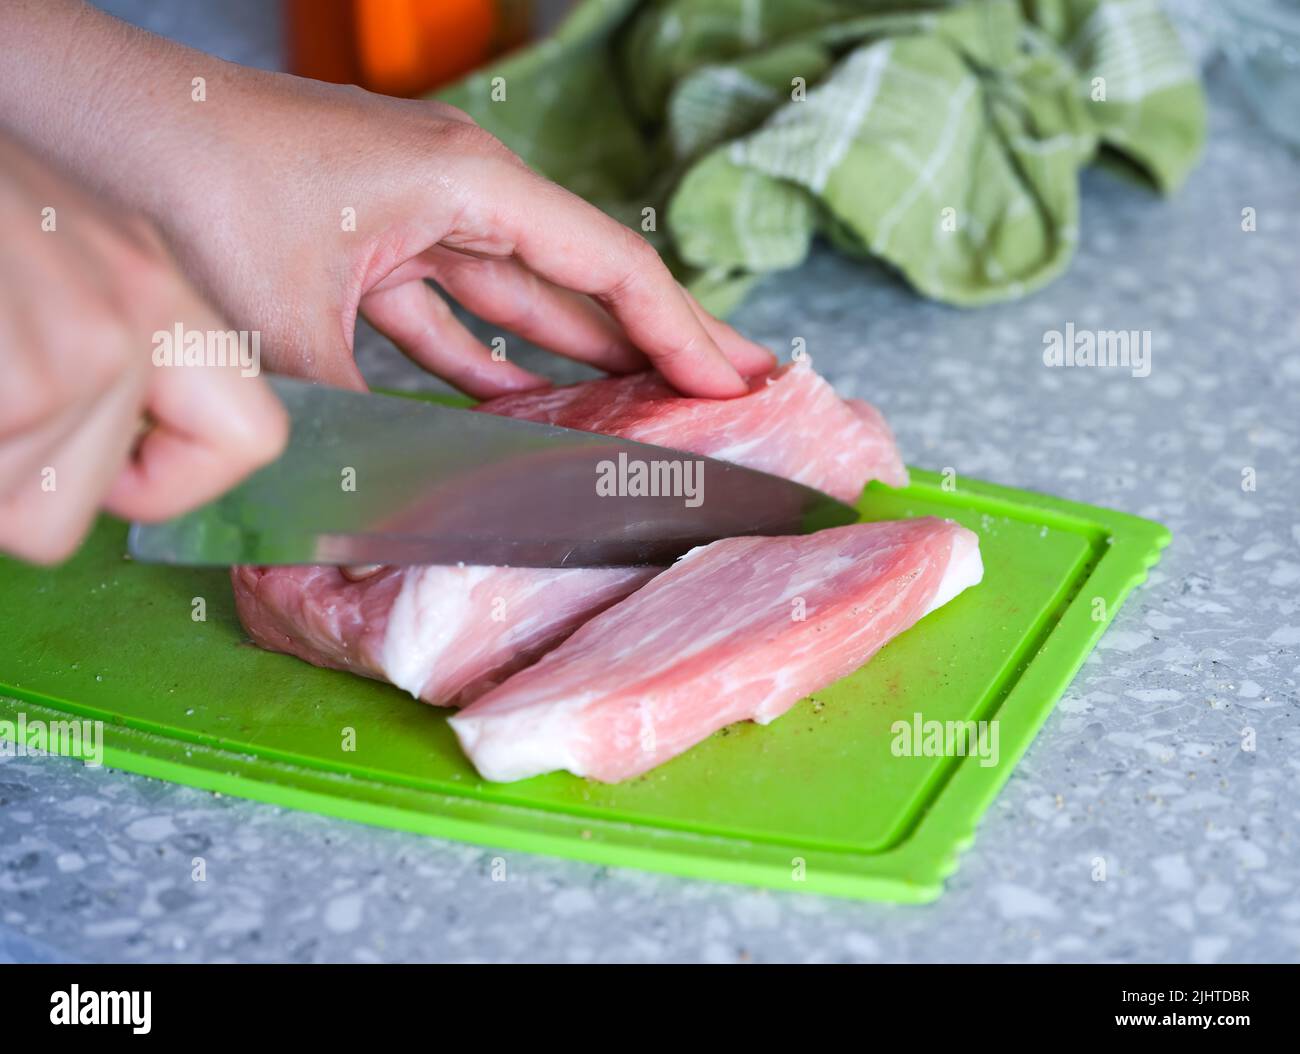 A woman with a knife cutting a raw pork on a green cutting board on a kitchen table. Some pepper and salt are scattered around Stock Photo